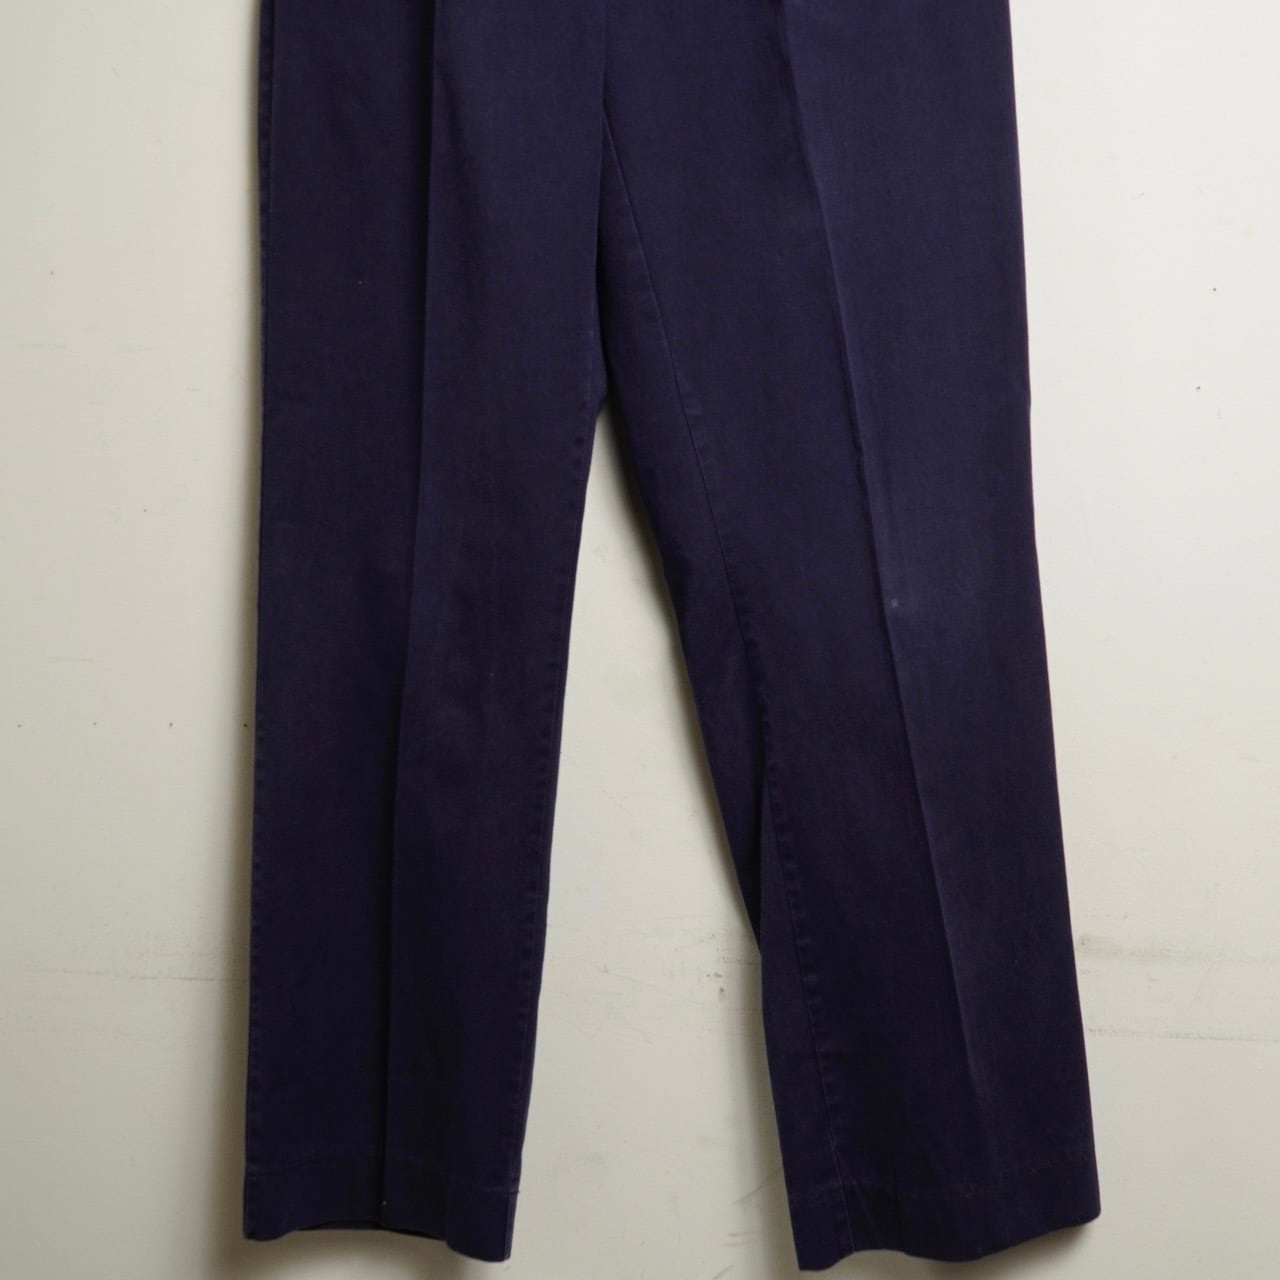 Royal Navy Working Dress Trousers | AMICI used vintage clothing store